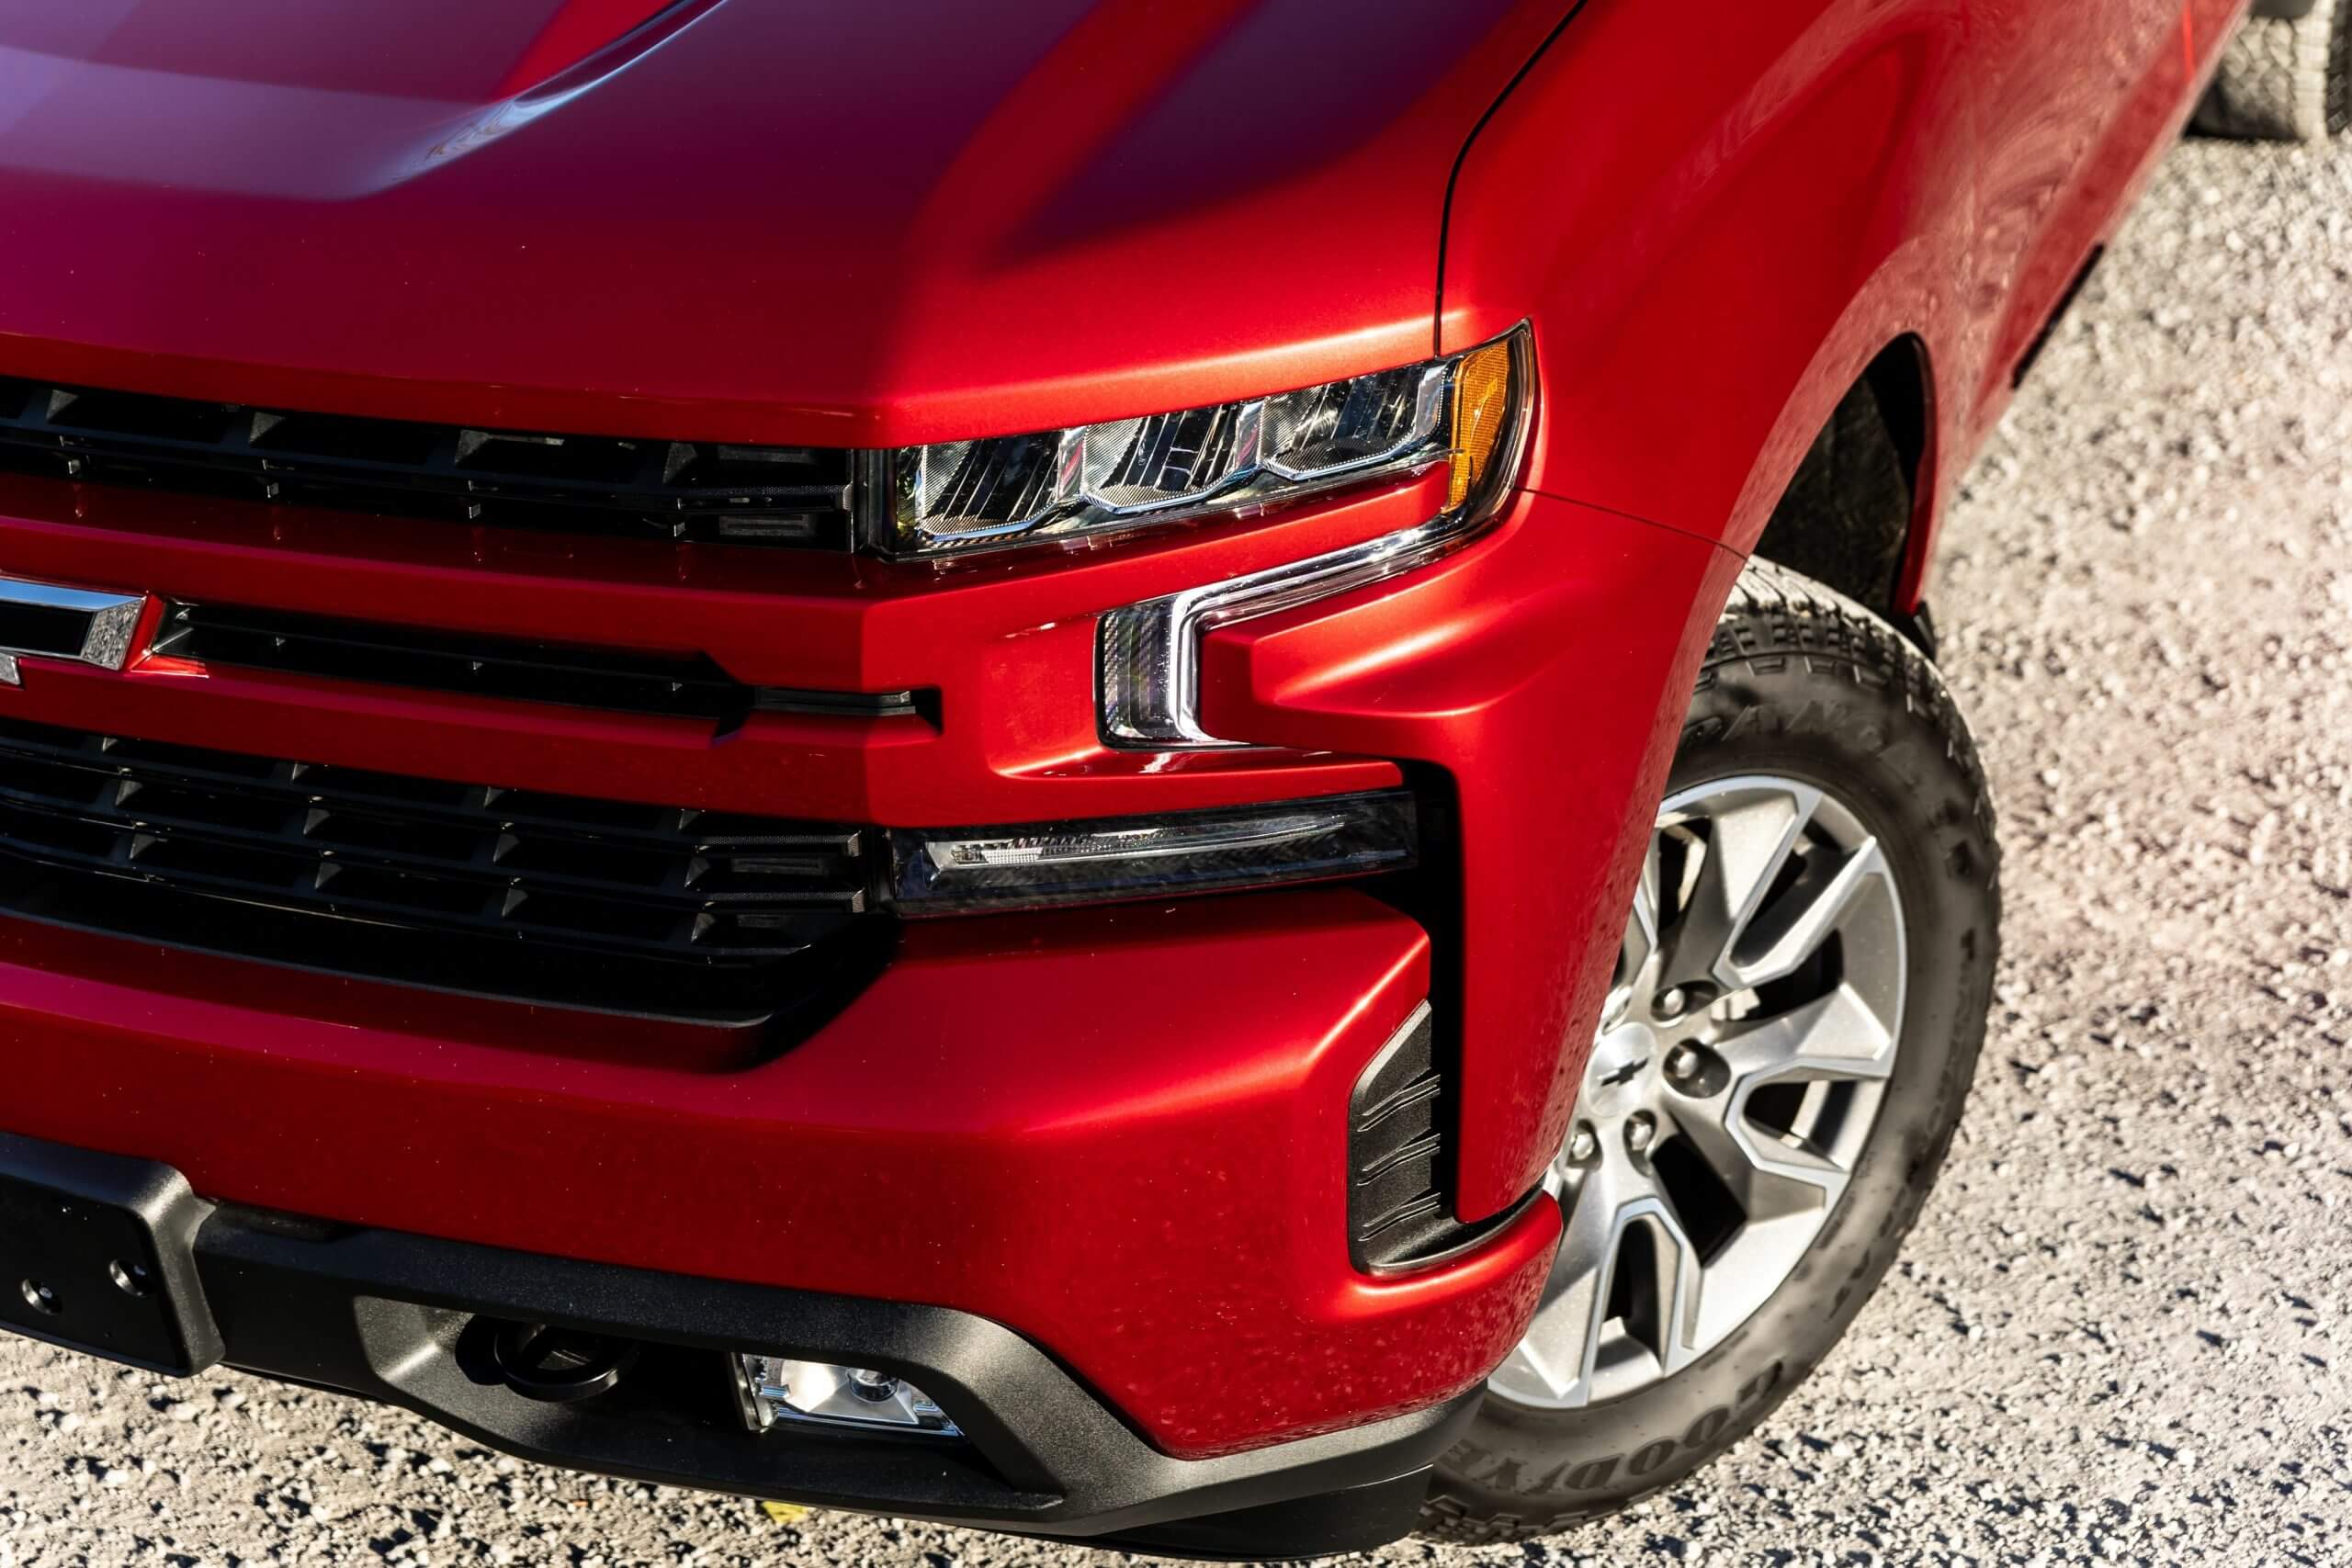 Closeup of the front of a burgundy 2021 model Chevy Silverado 15